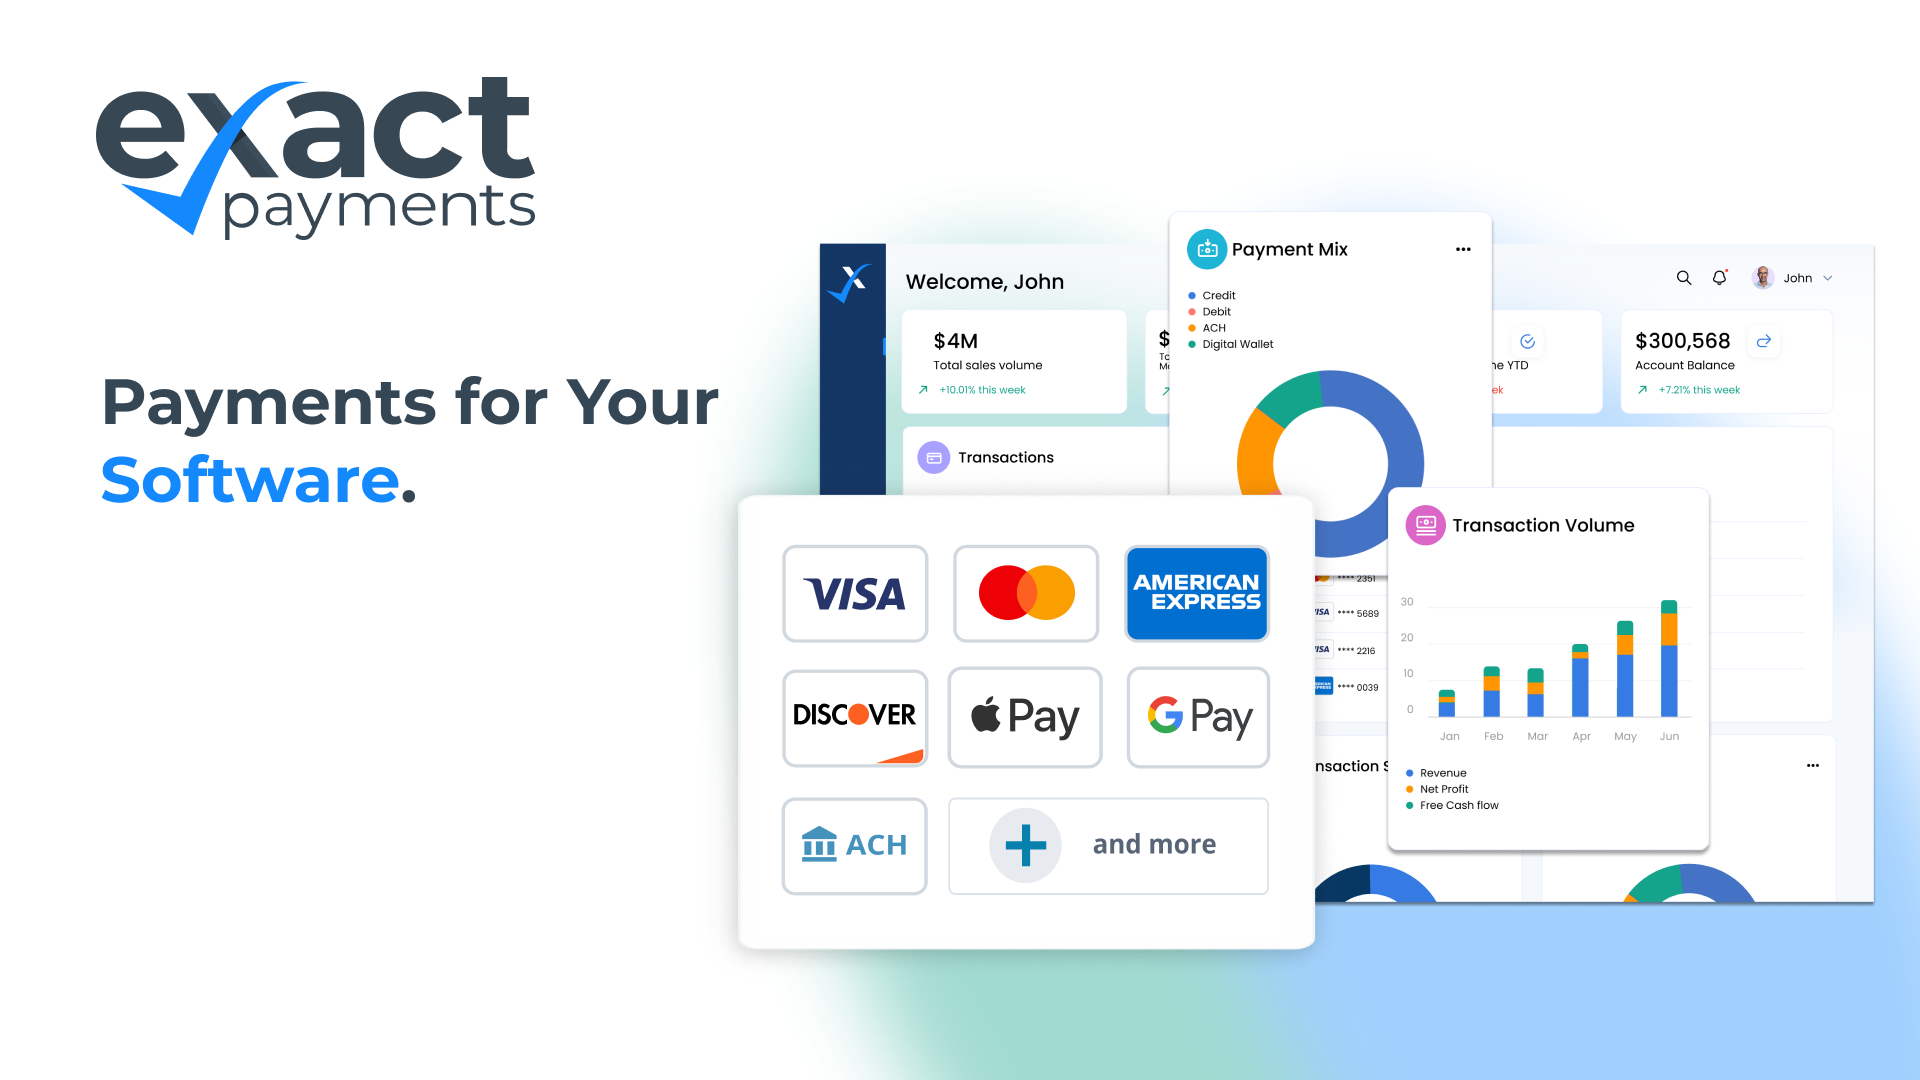 Embedding payments into your platform is a powerful value driver. Exact has everything you need to build and scale the process of becoming a Payment Facilitator, from instant onboarding to flexible payouts, fraud protection, and reporting.